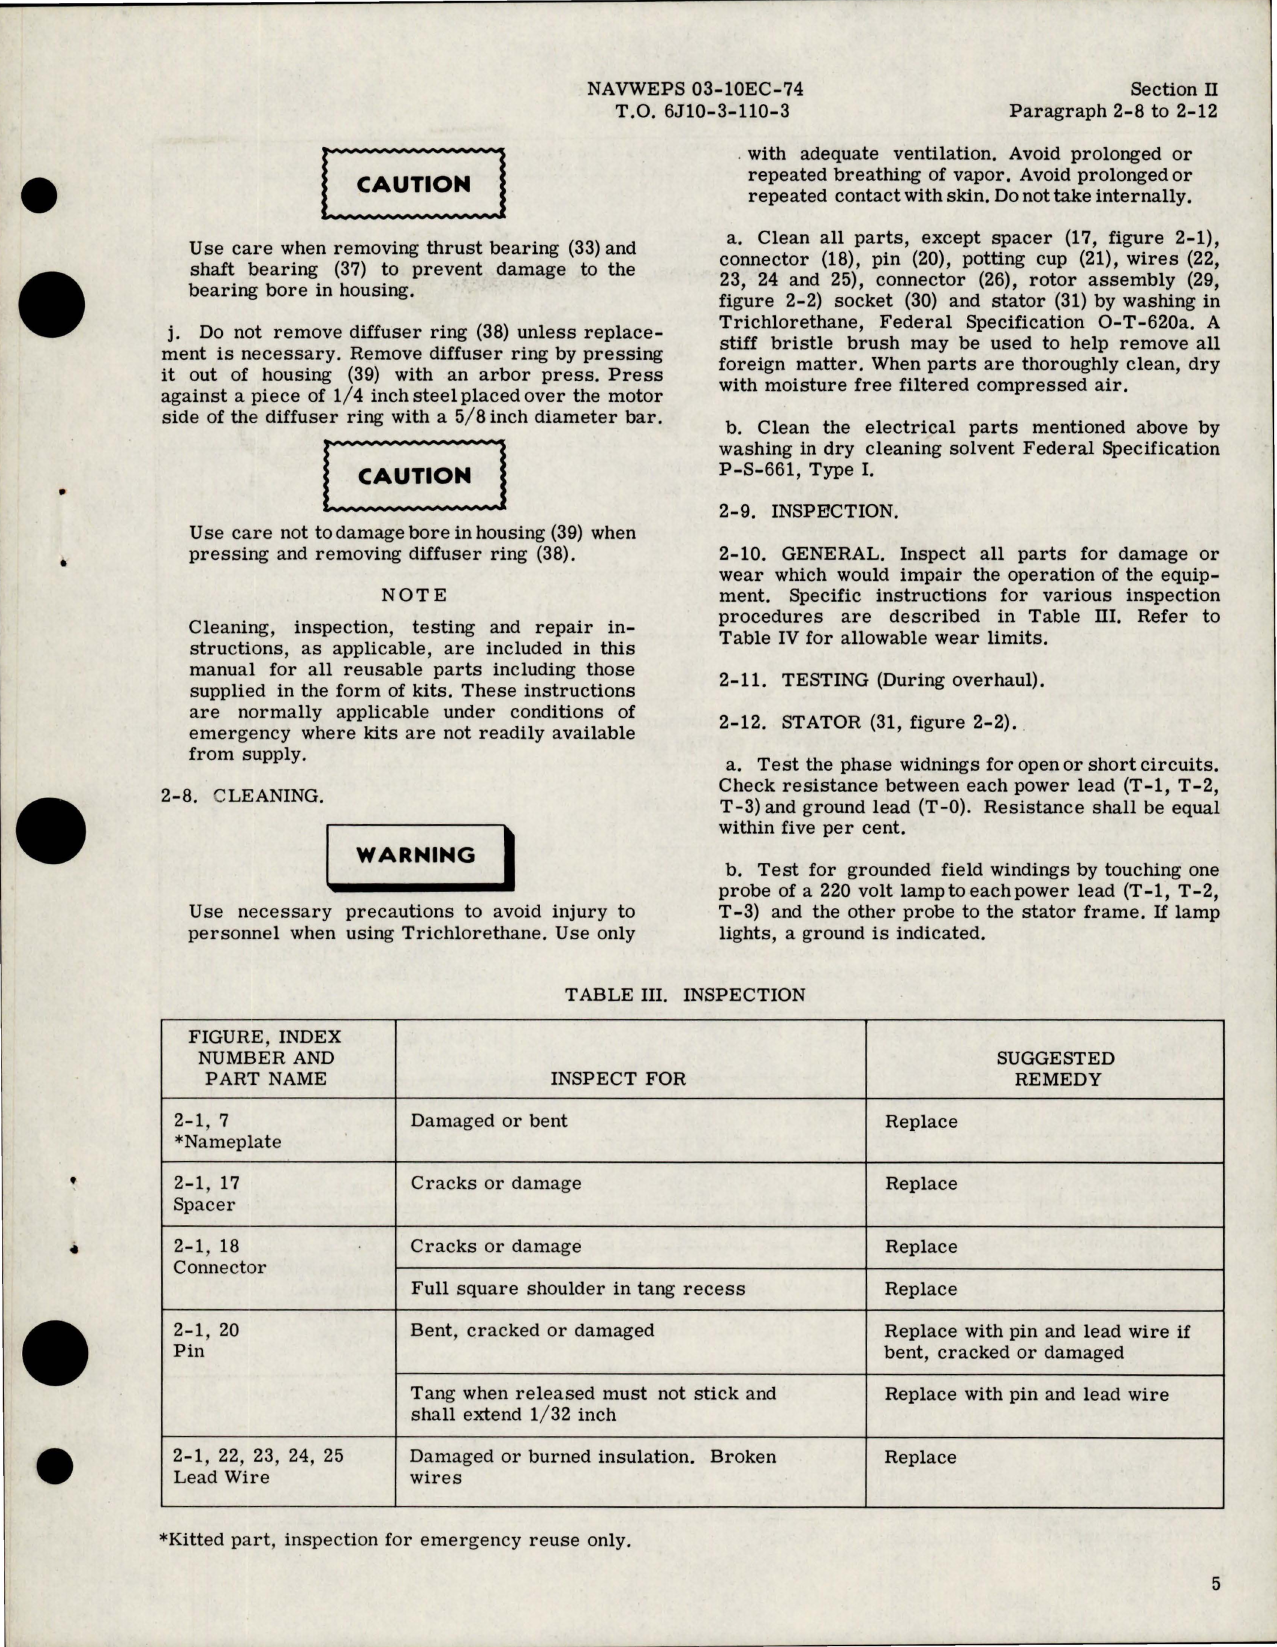 Sample page 5 from AirCorps Library document: Overhaul Instructions for Submerged Booster Pump - Models TB117300-3, TB117300-5, and 245200-1 